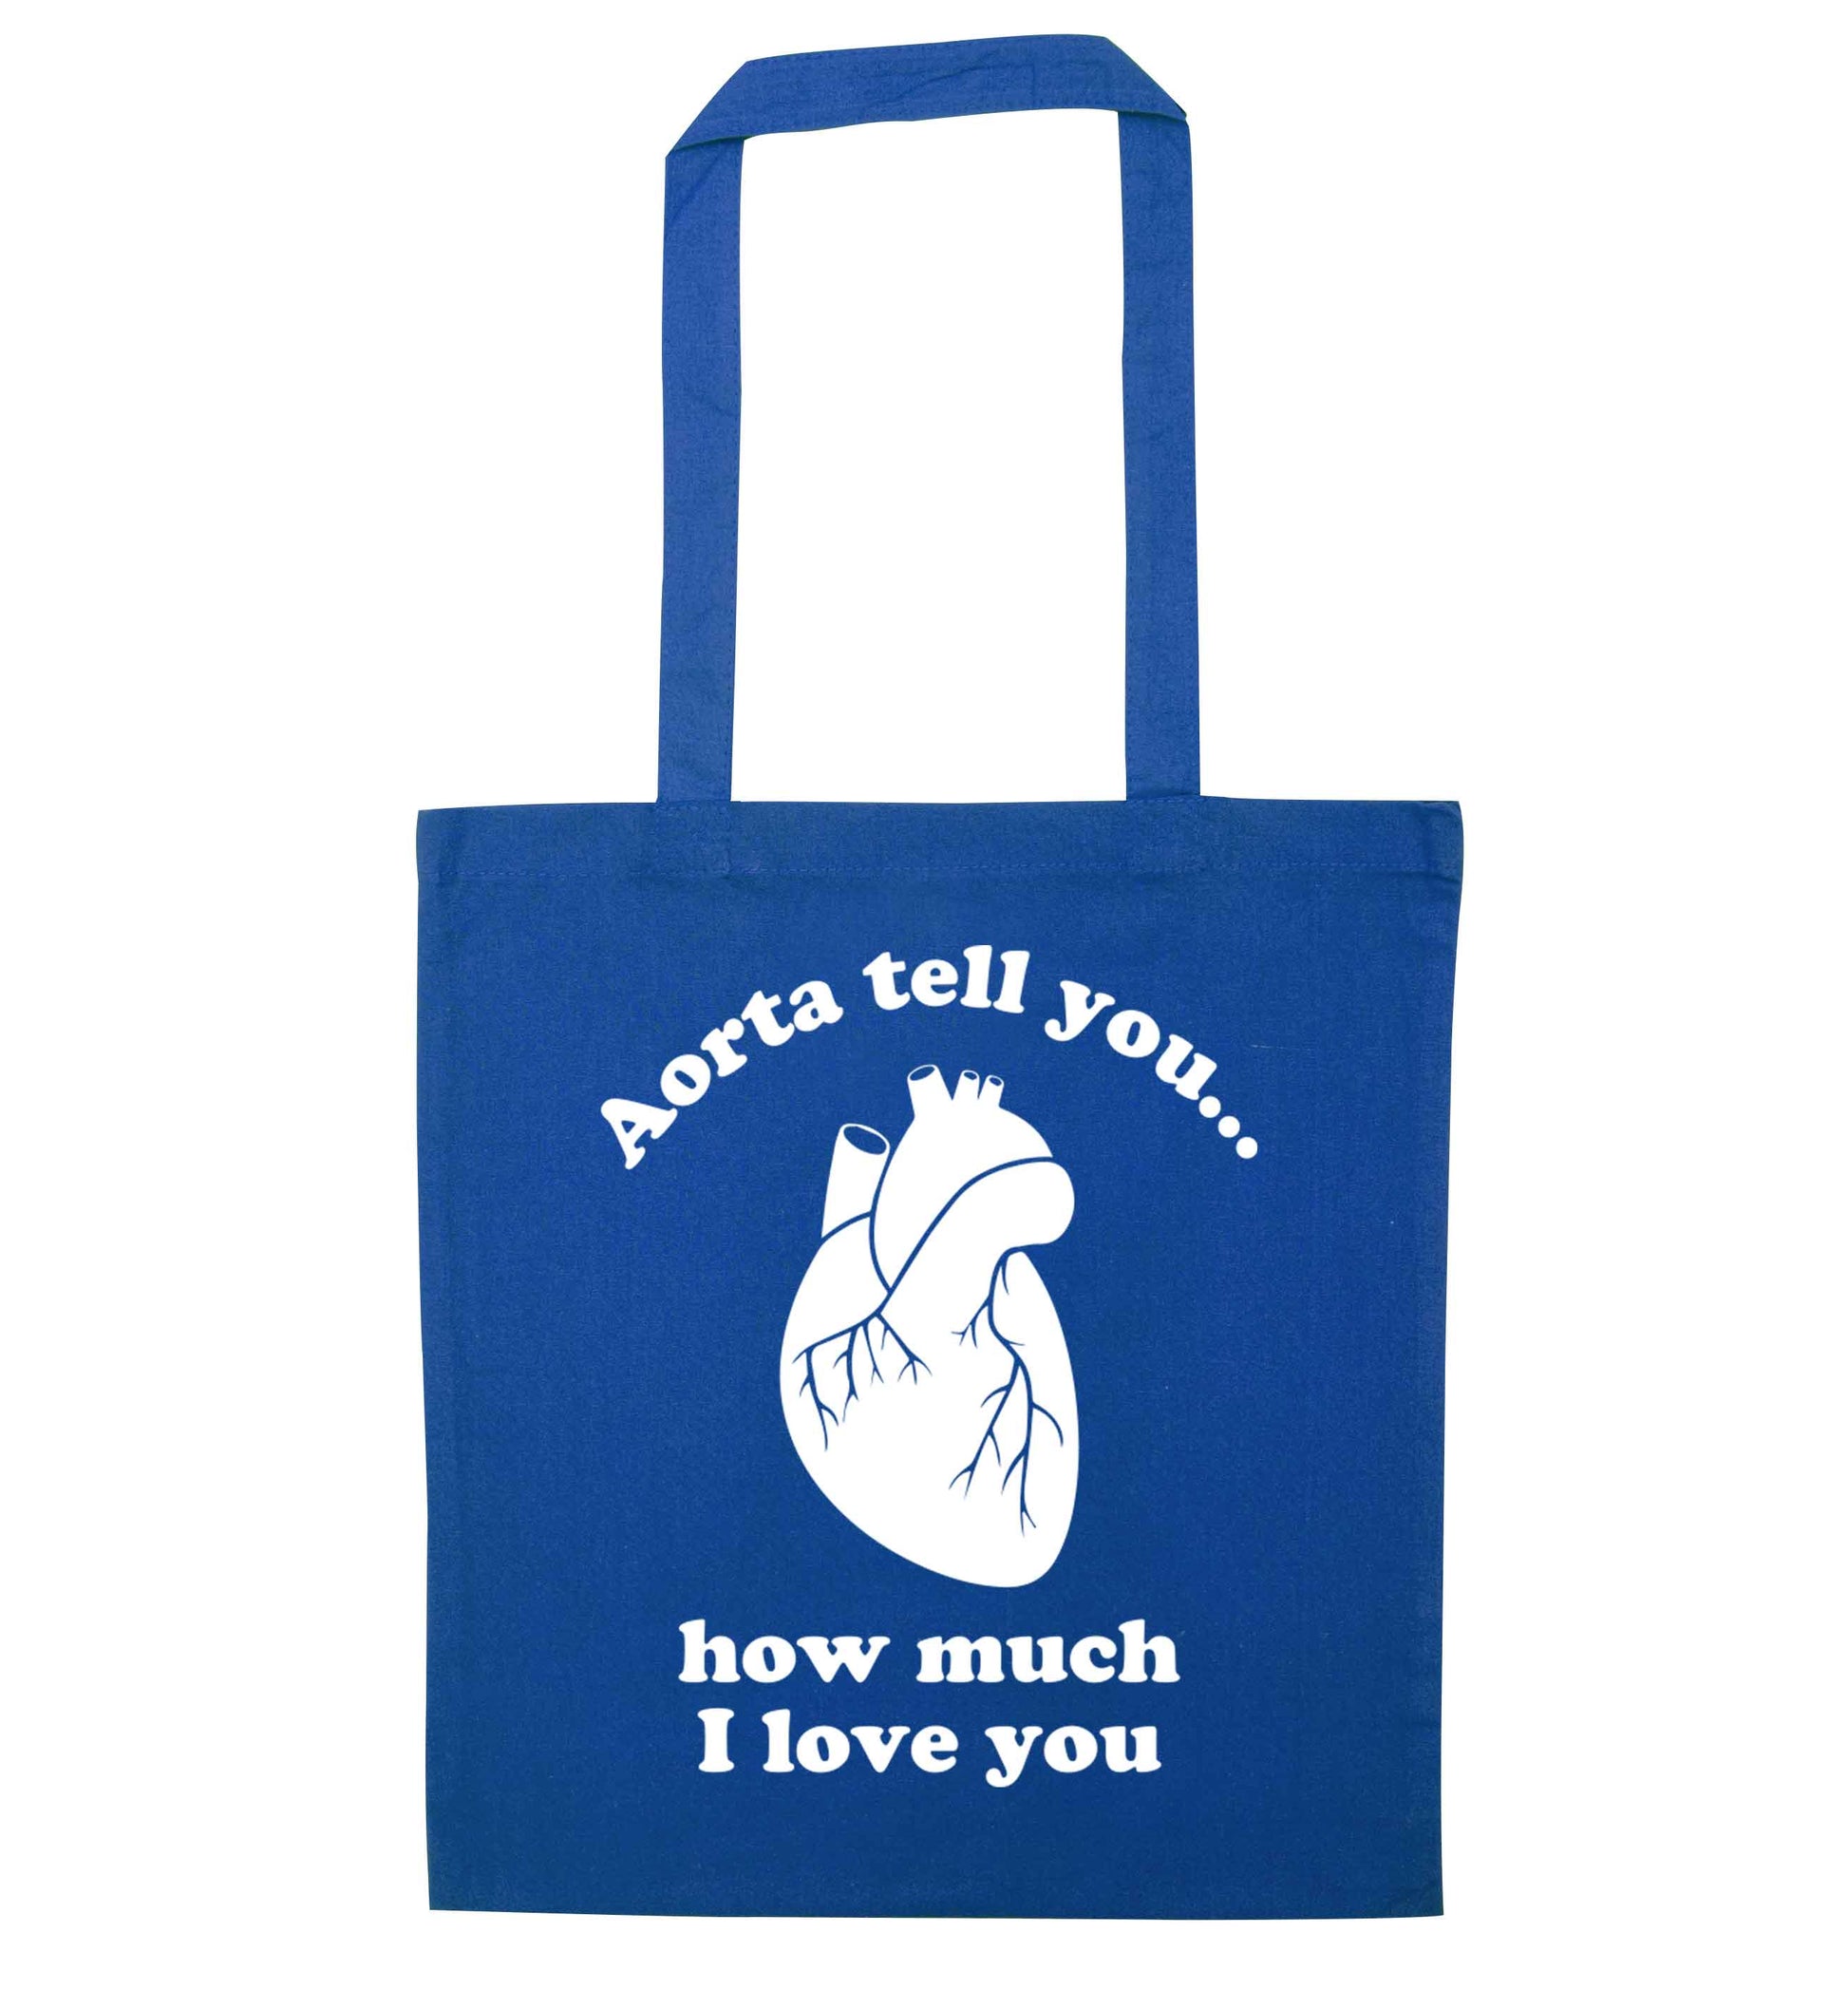 Aorta tell you how much I love you blue tote bag